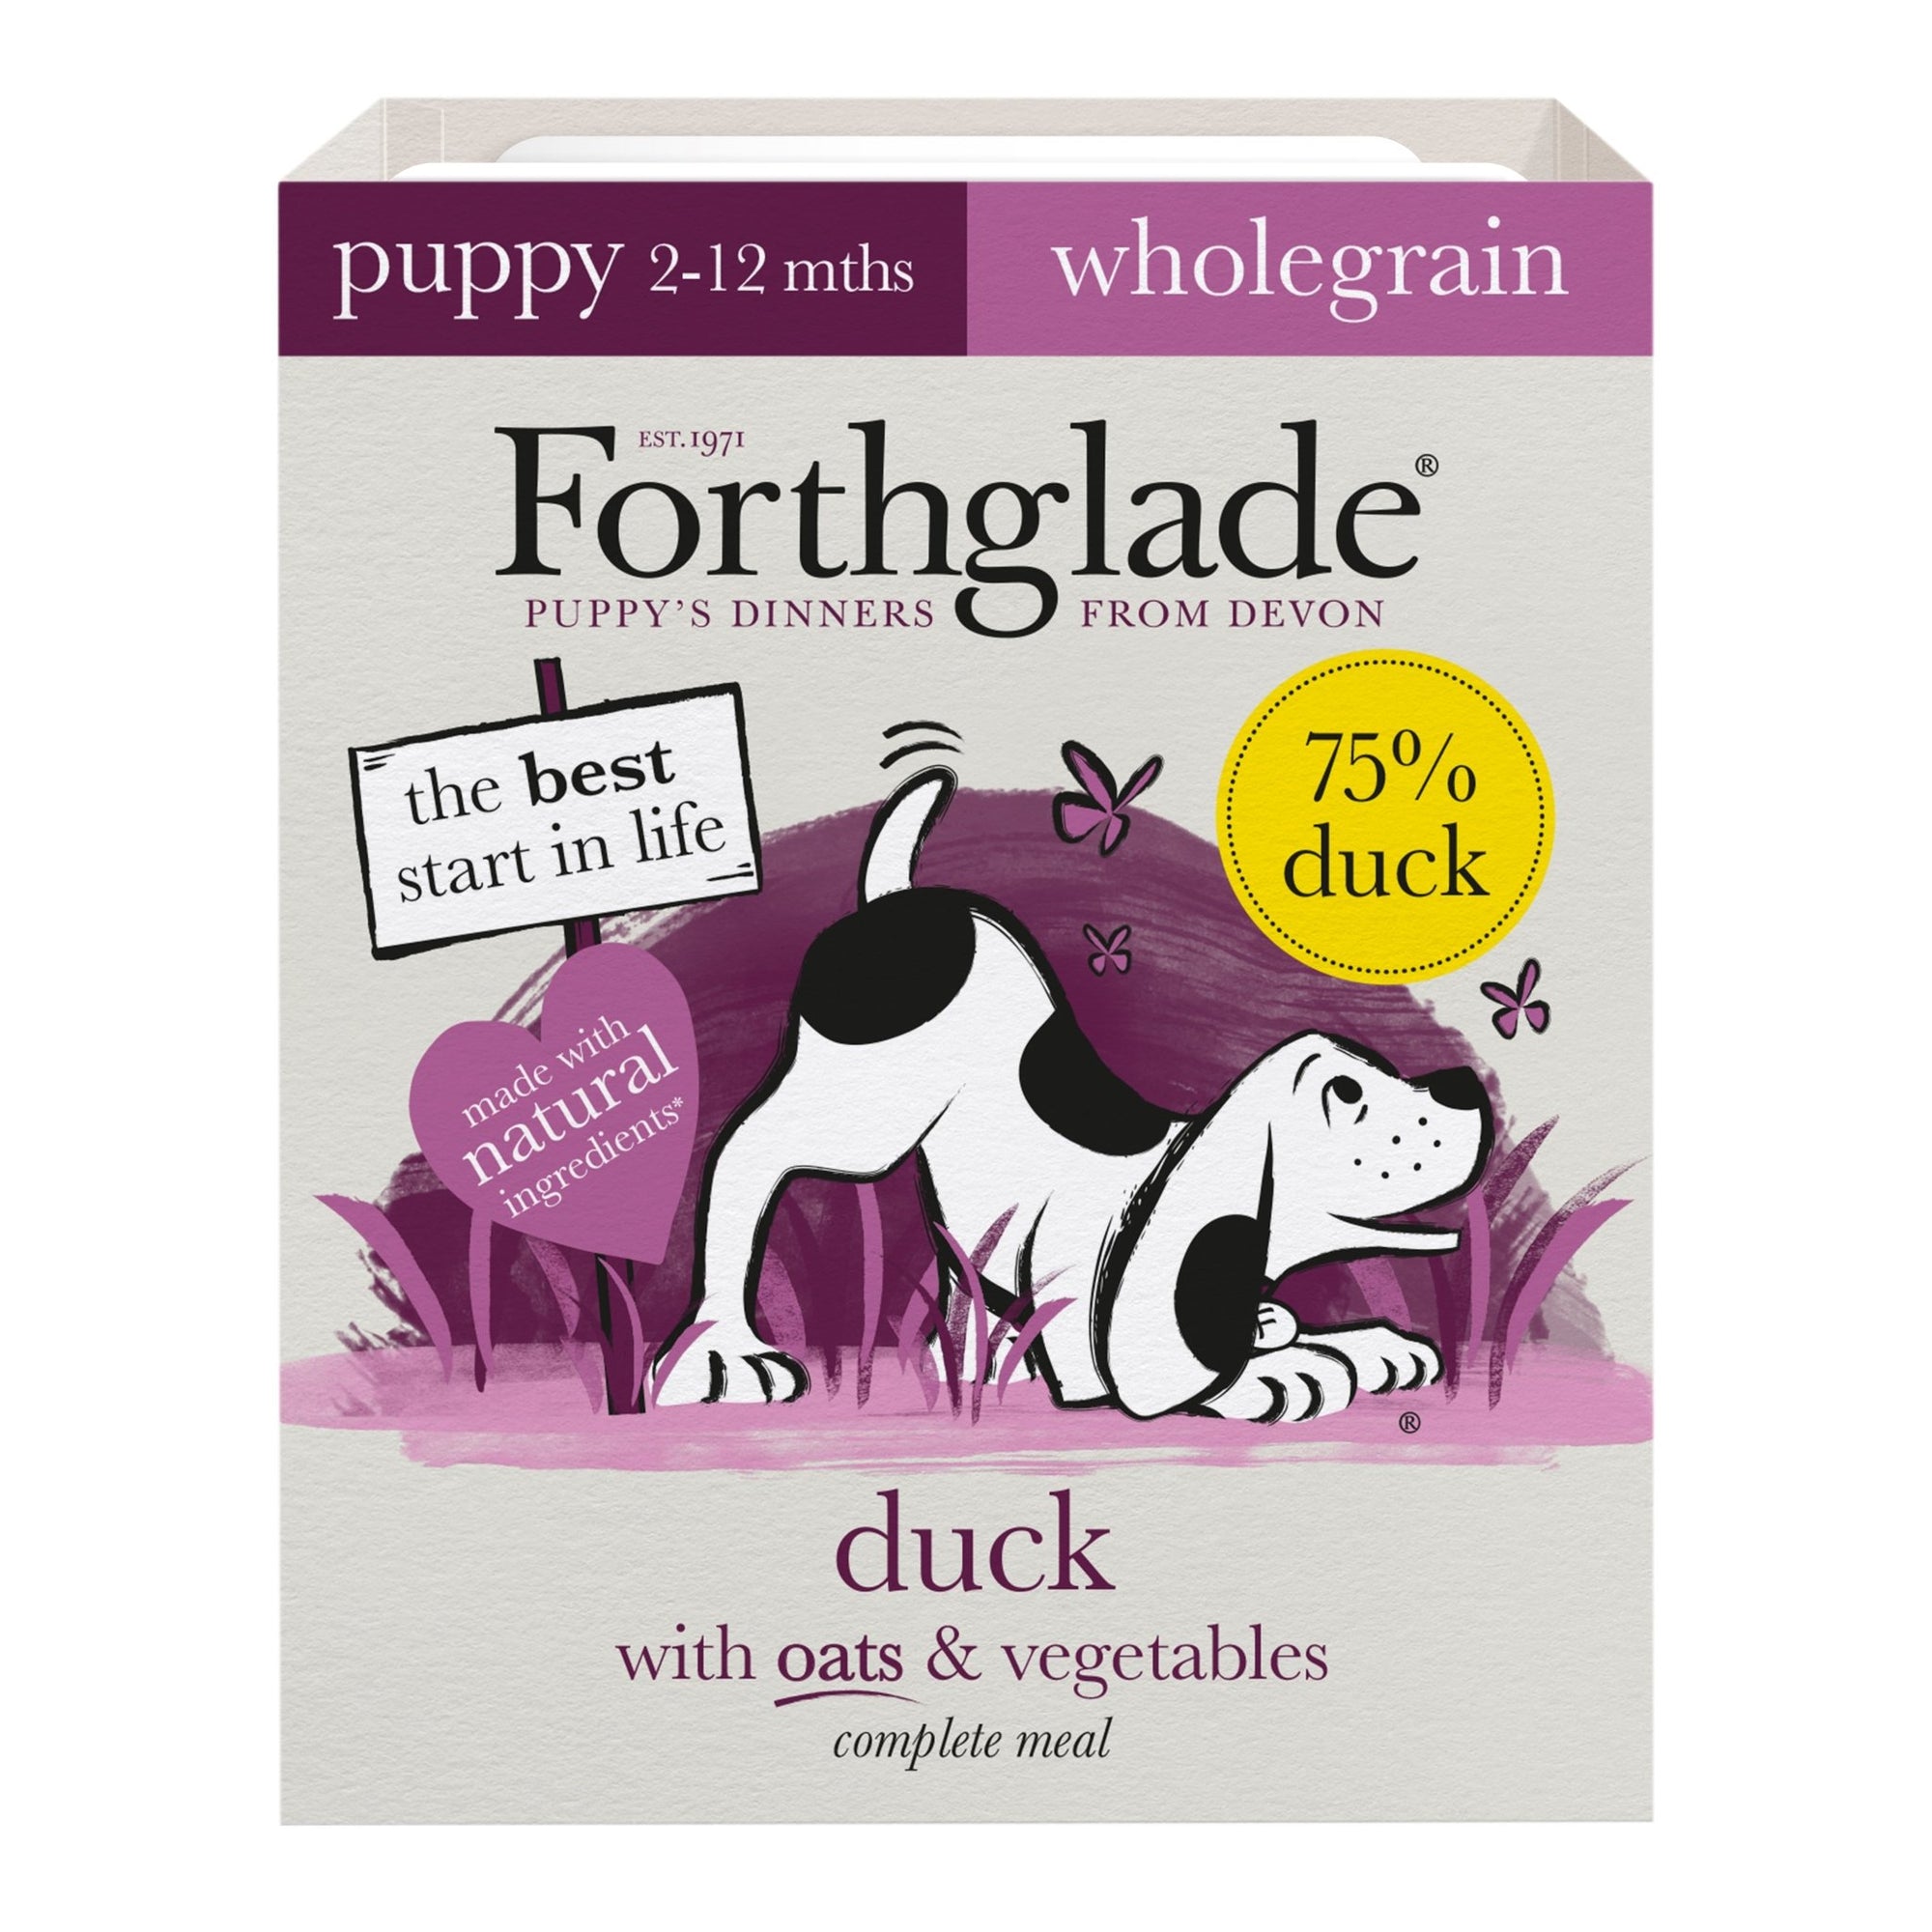 Forthglade Puppy Complete Wholegrains Duck with Oats & Veg 18x395g, Forthglade,